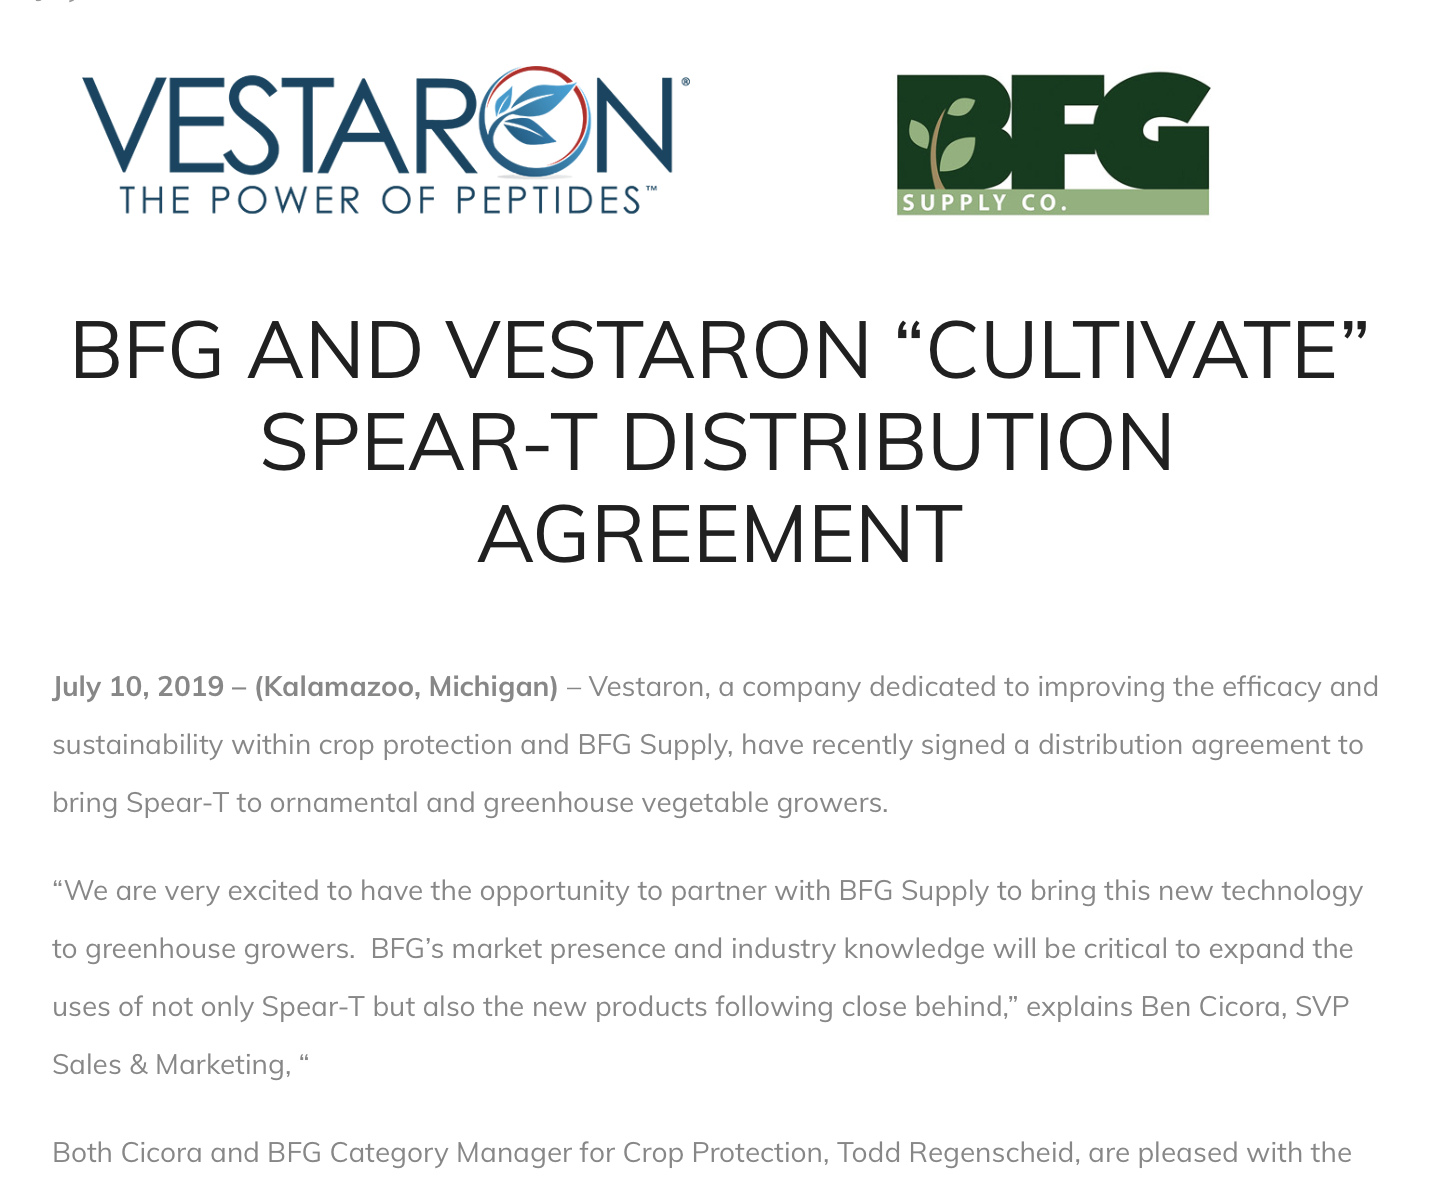 Sales And Distribution Agreement Bfg And Vestaron Cultivate Spear T Distribution Agreement